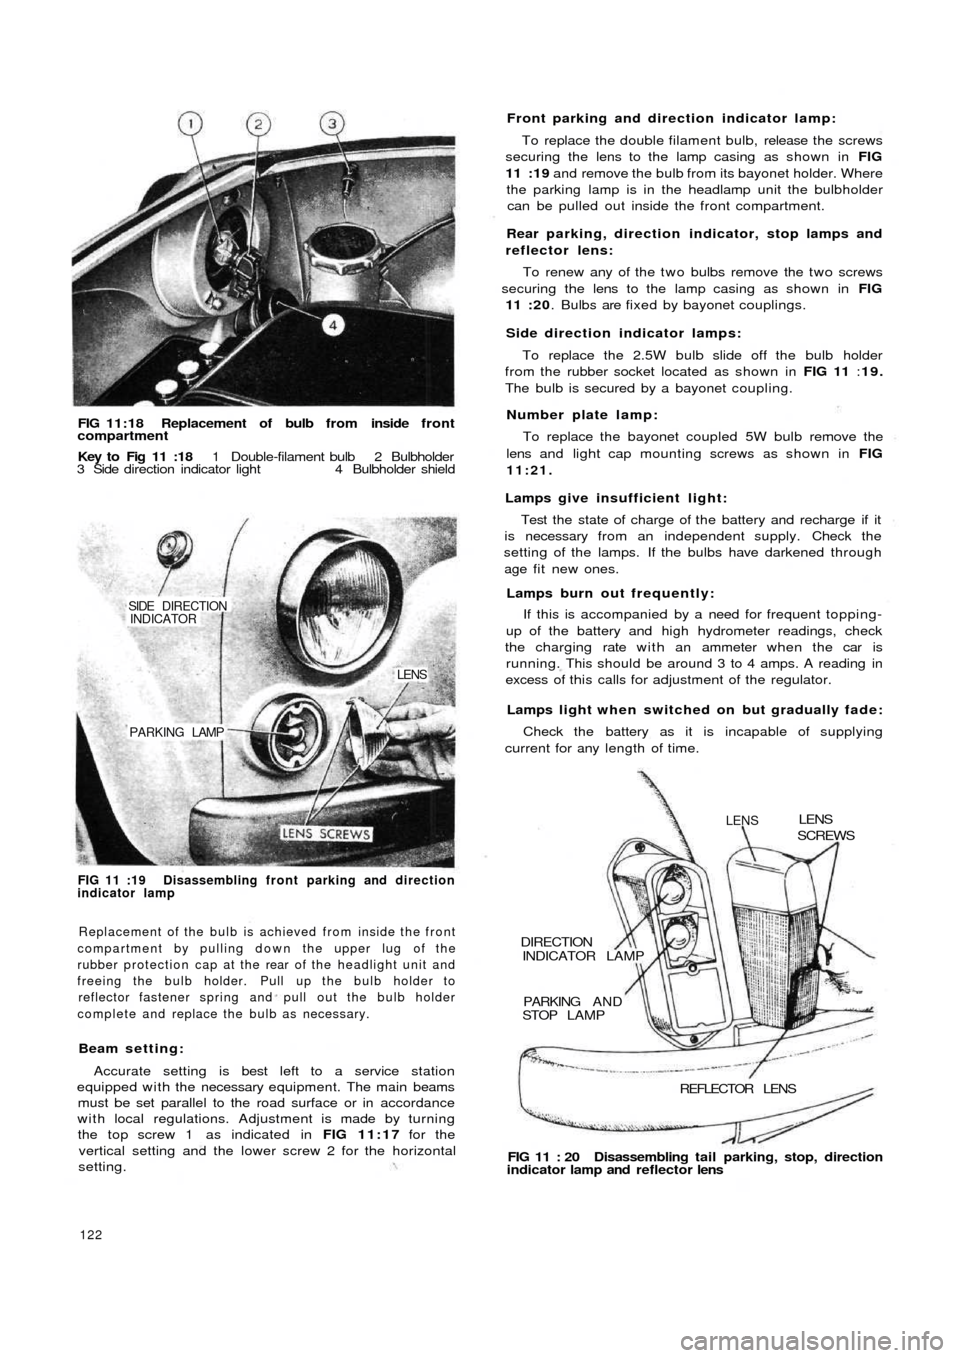 FIAT 500 1970 1.G Workshop Manual FIG 11:18 Replacement of bulb from inside f r o n tcompartment
Key to  Fig 11 :18 1 Double-filament bulb 2 Bulbholder
3 Side direction indicator light 4 Bulbholder shield
PARKING LAMP
LENS
SIDE  DIREC